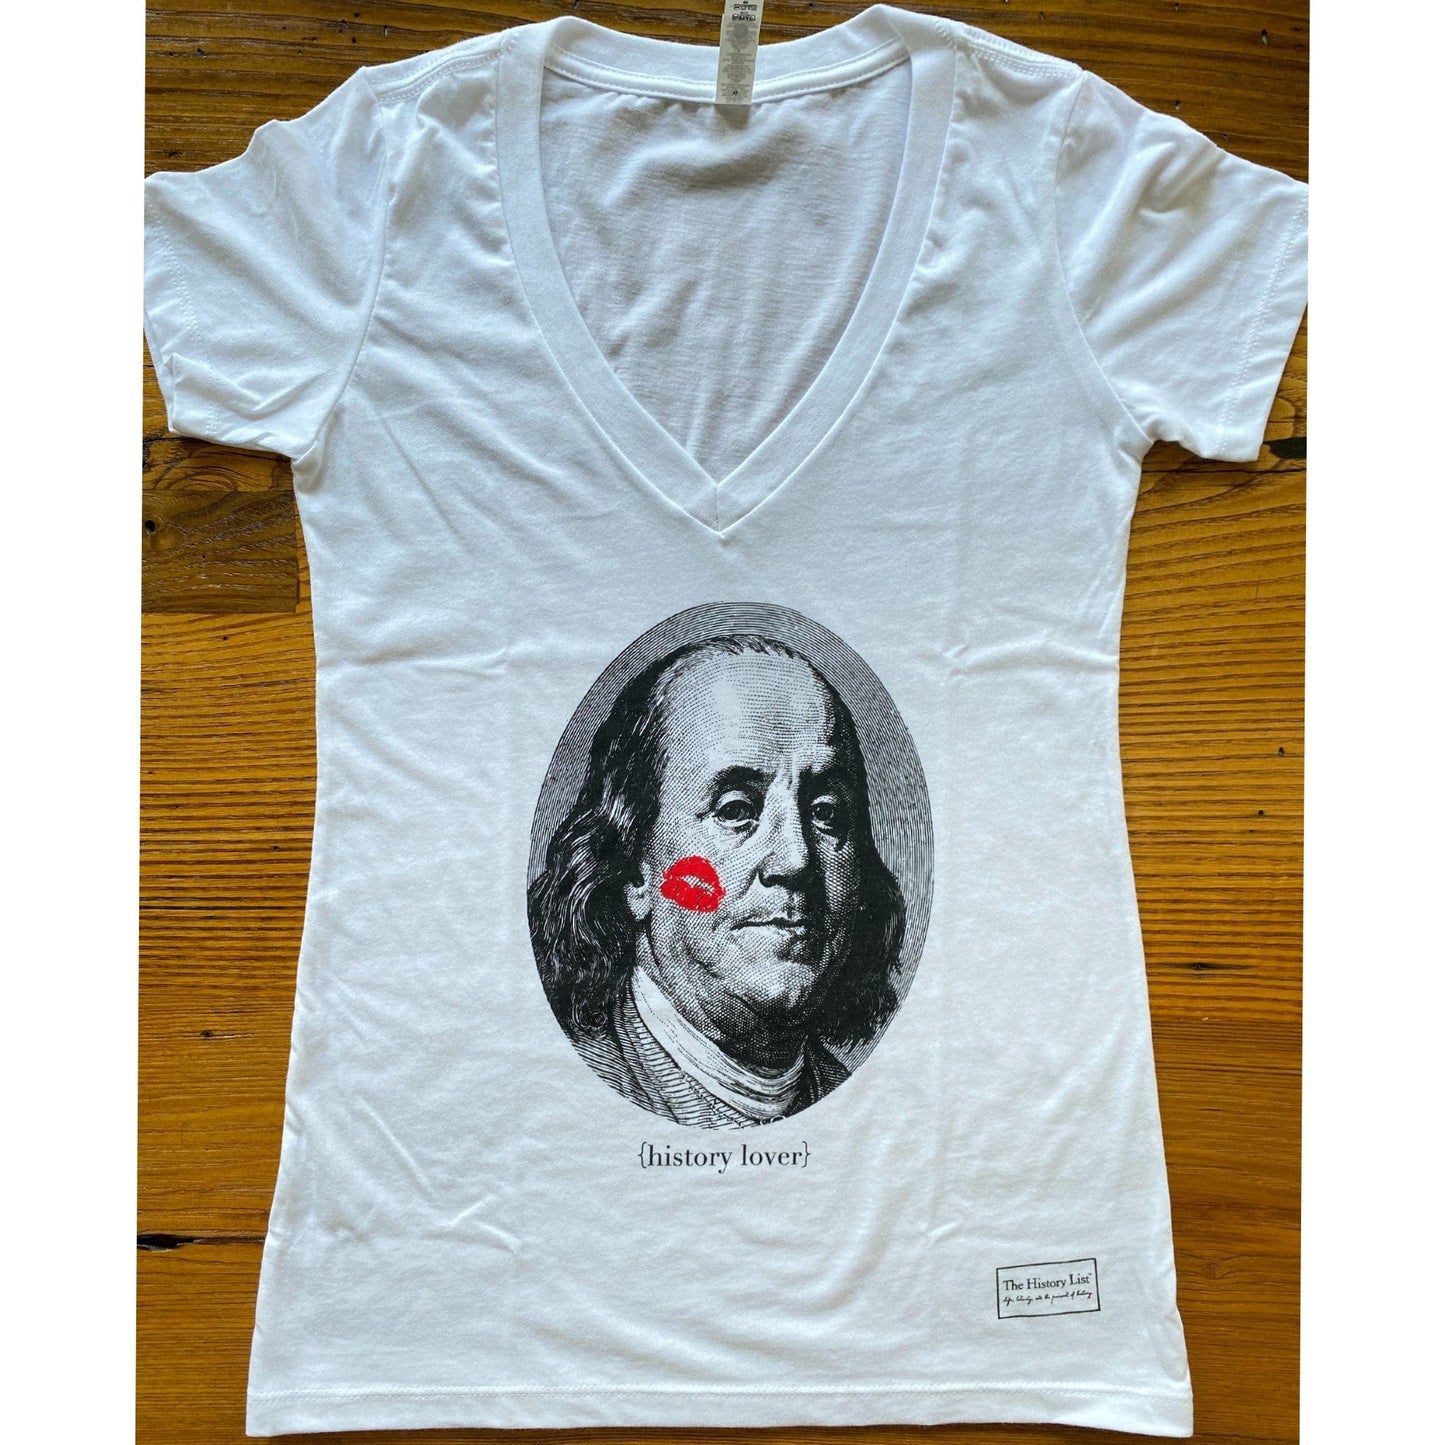 "History Lover" V-neck T-shirt with Ben Franklin from The History List Store